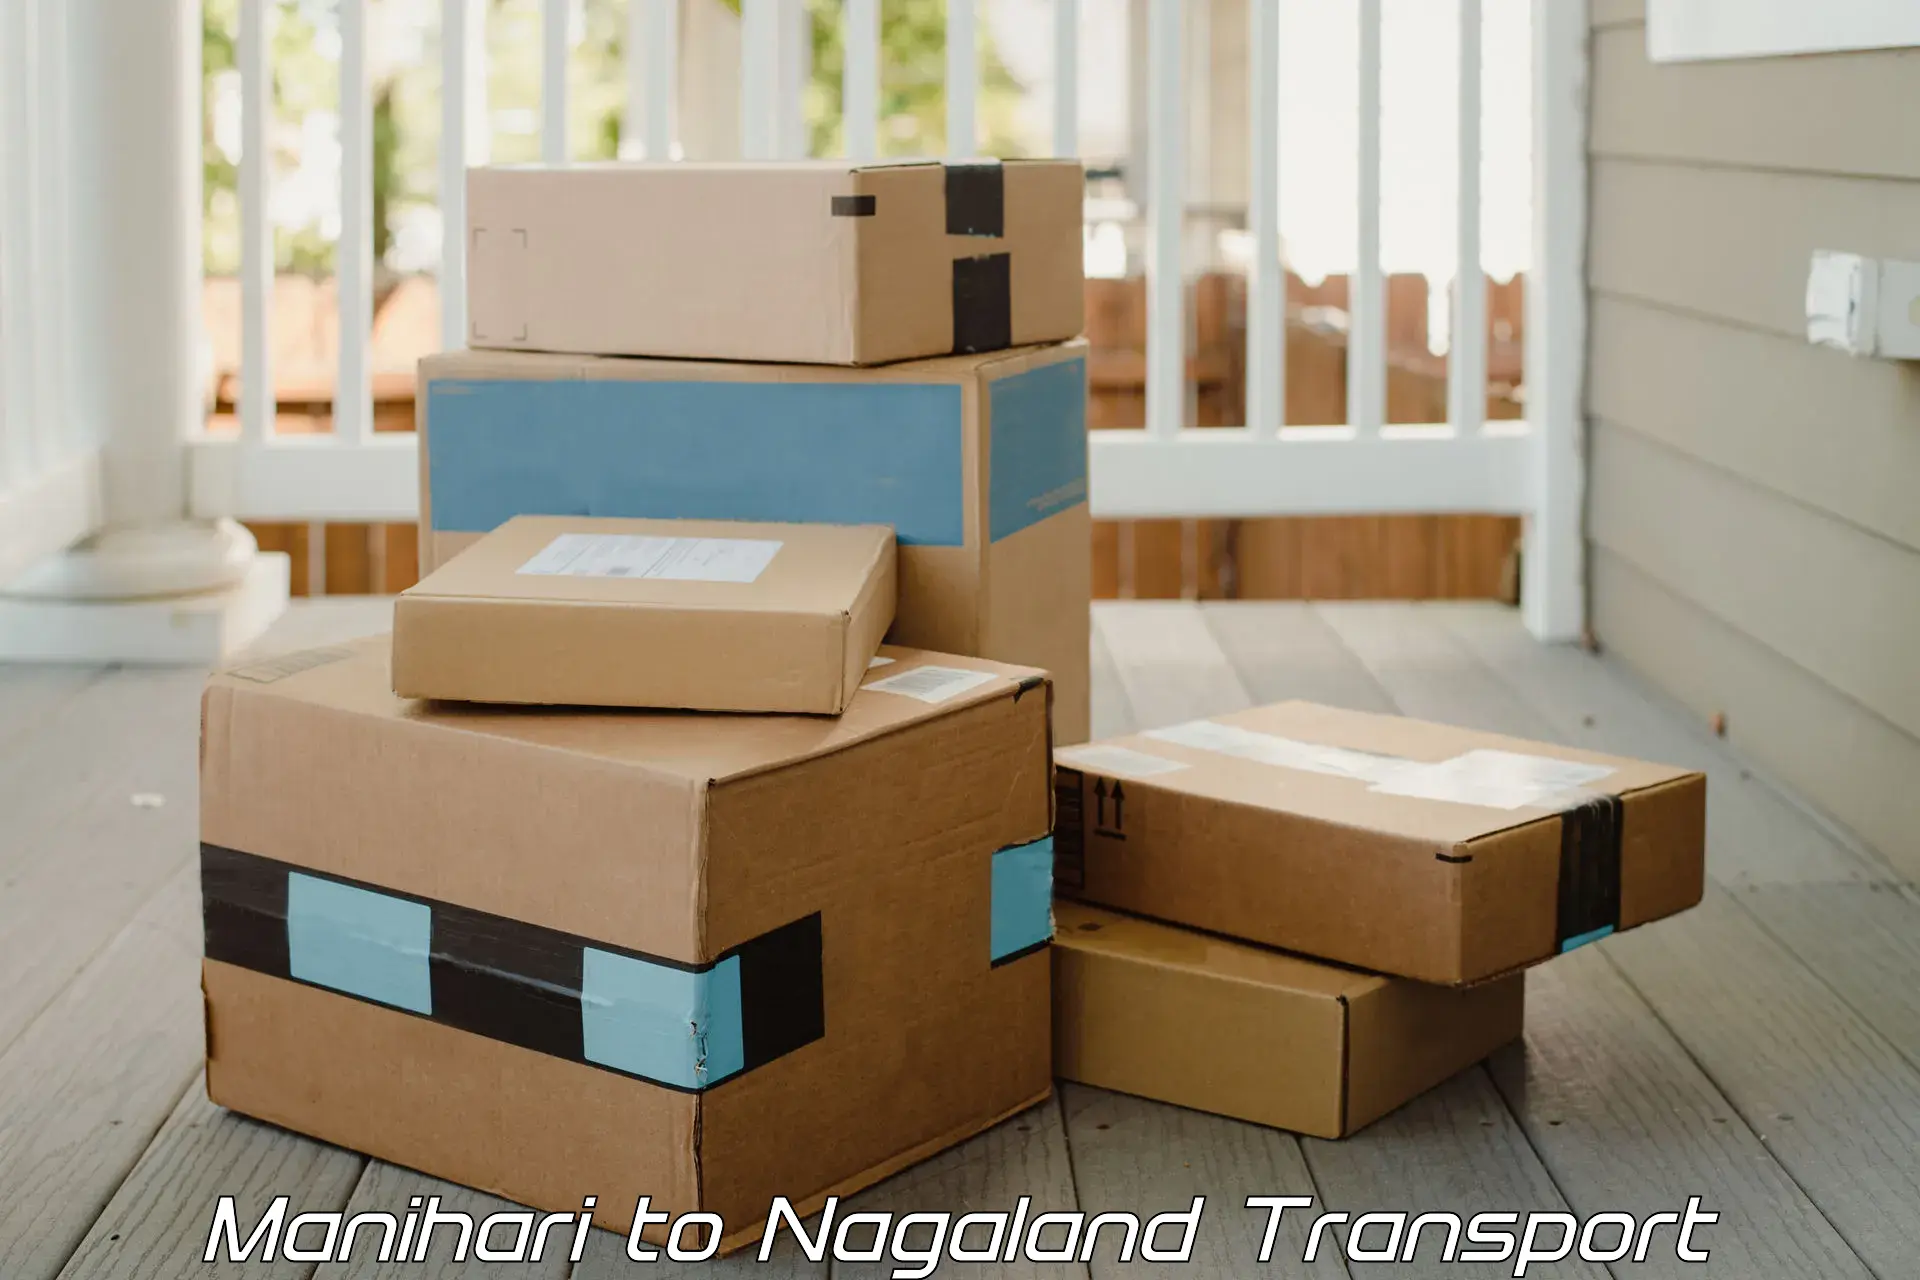 Goods delivery service Manihari to Nagaland